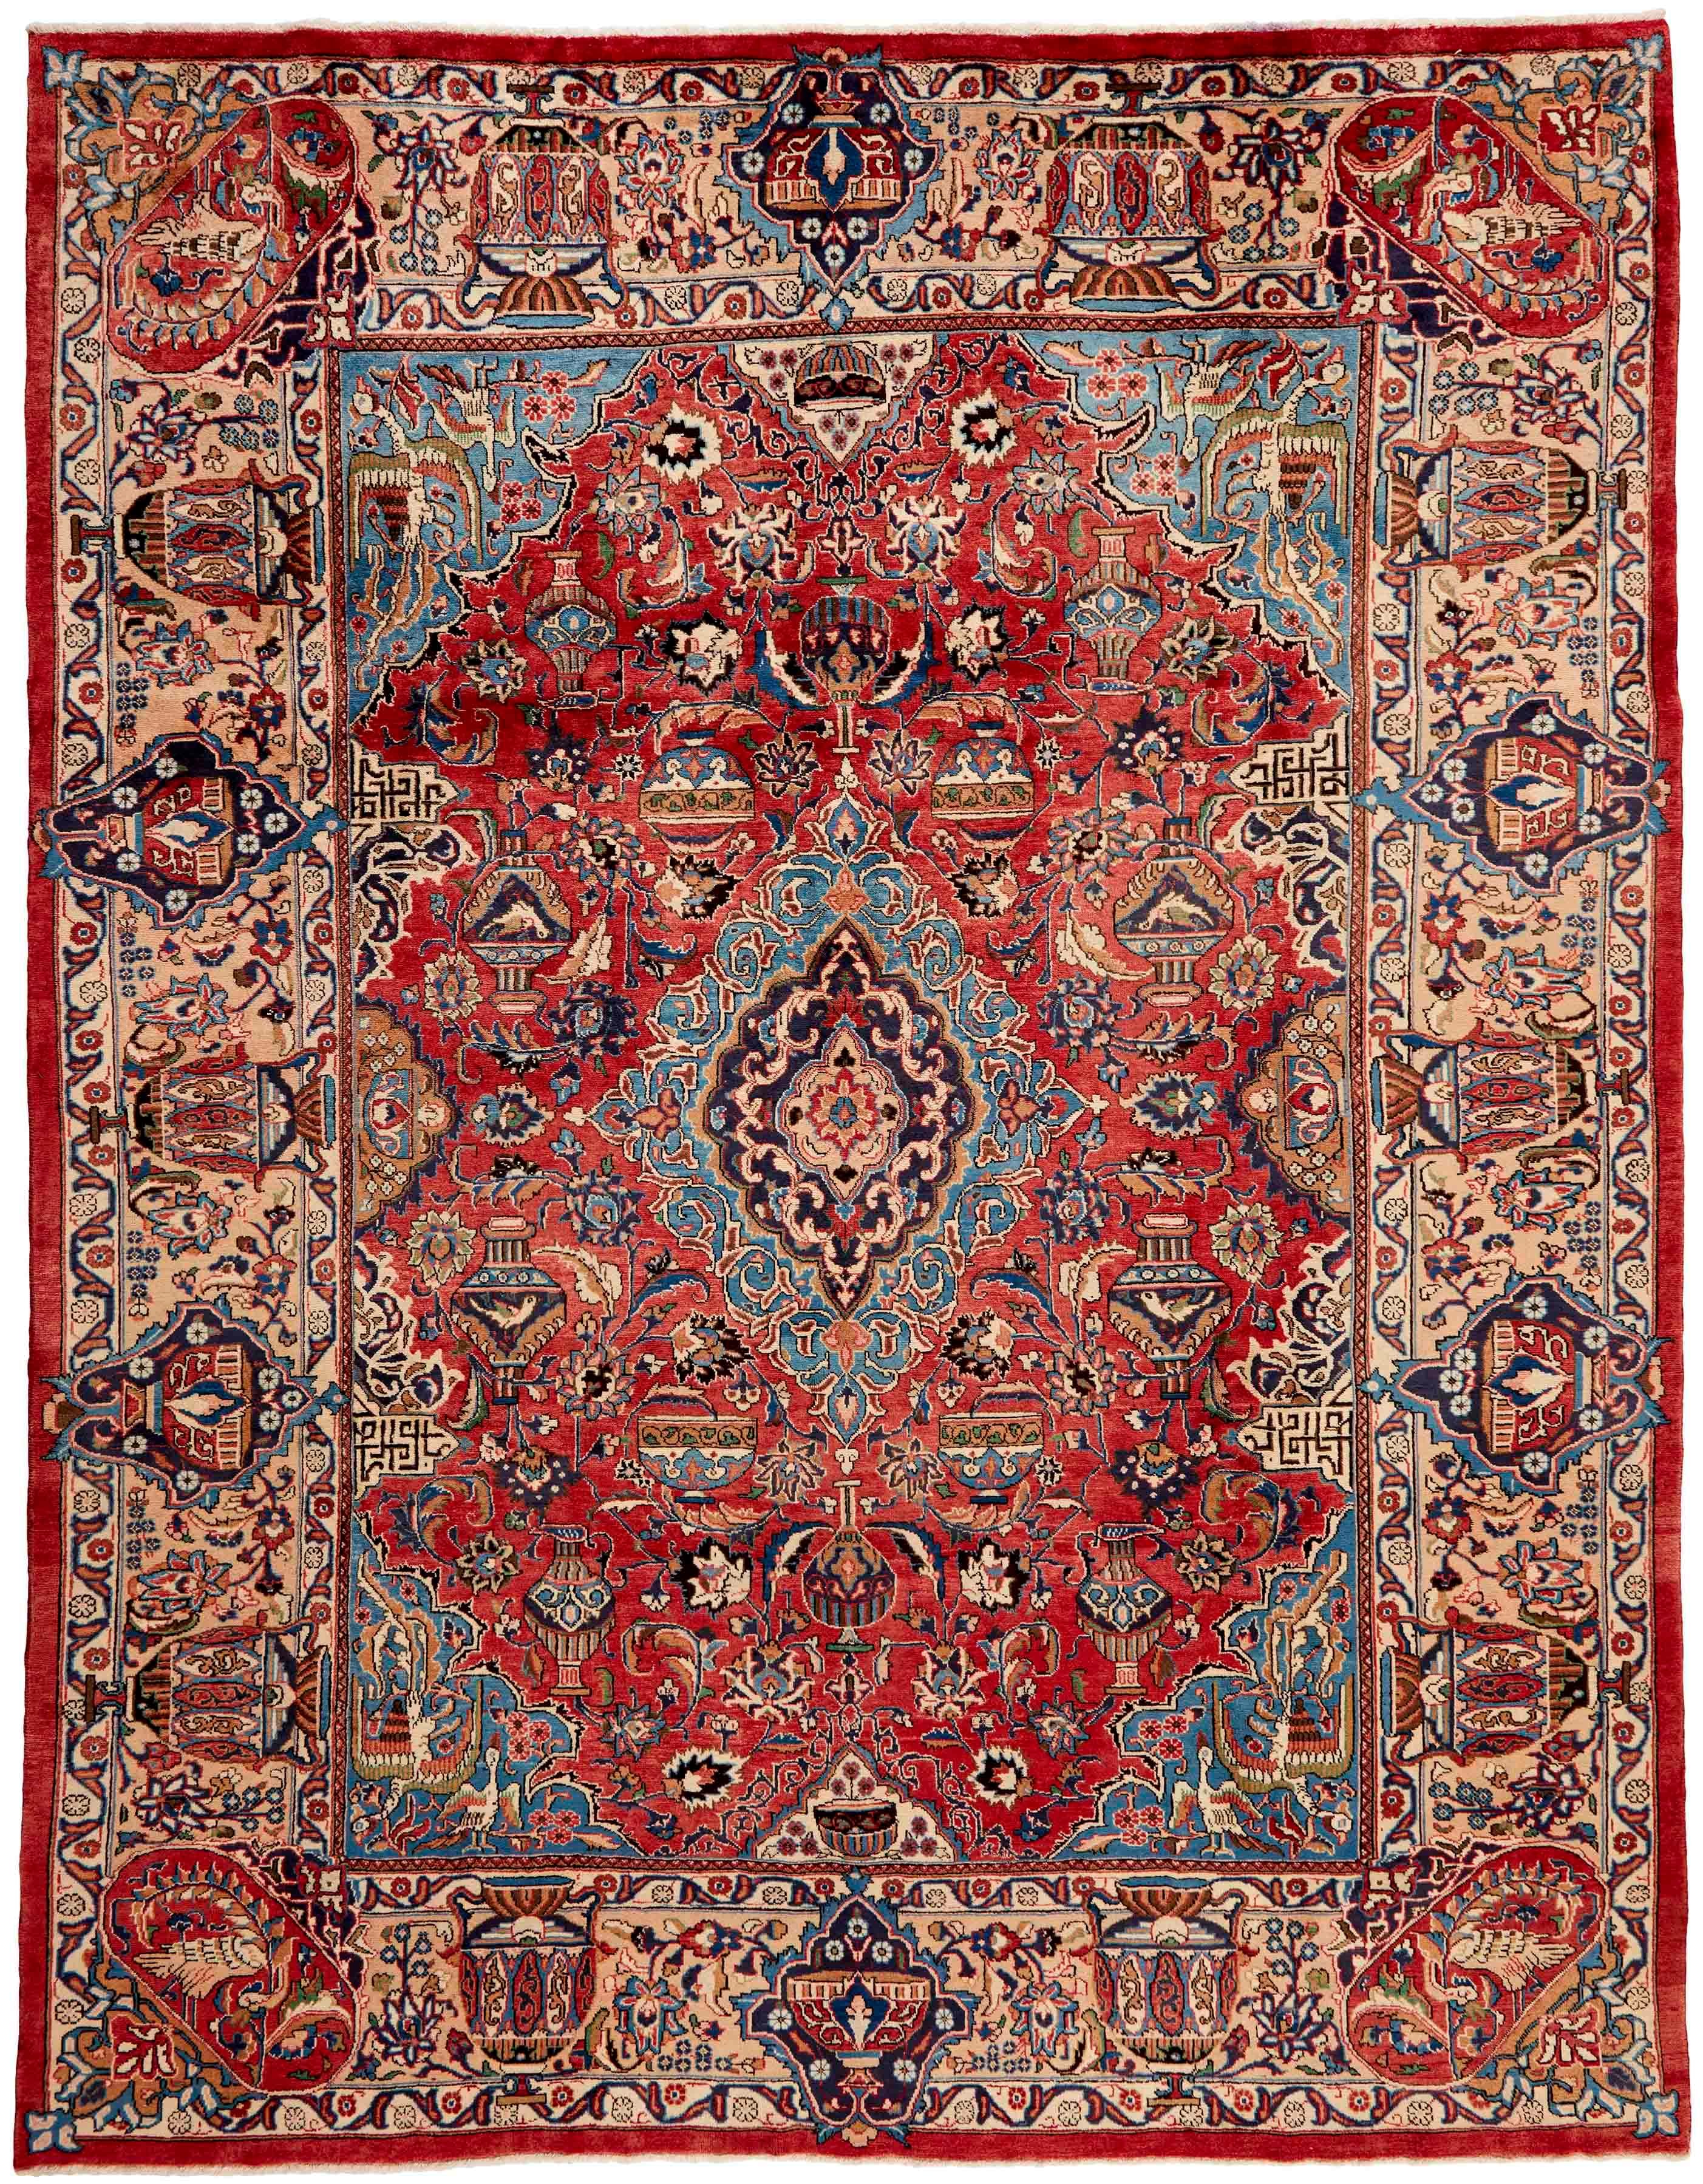 Authentic persian rug with a traditional floral design in red